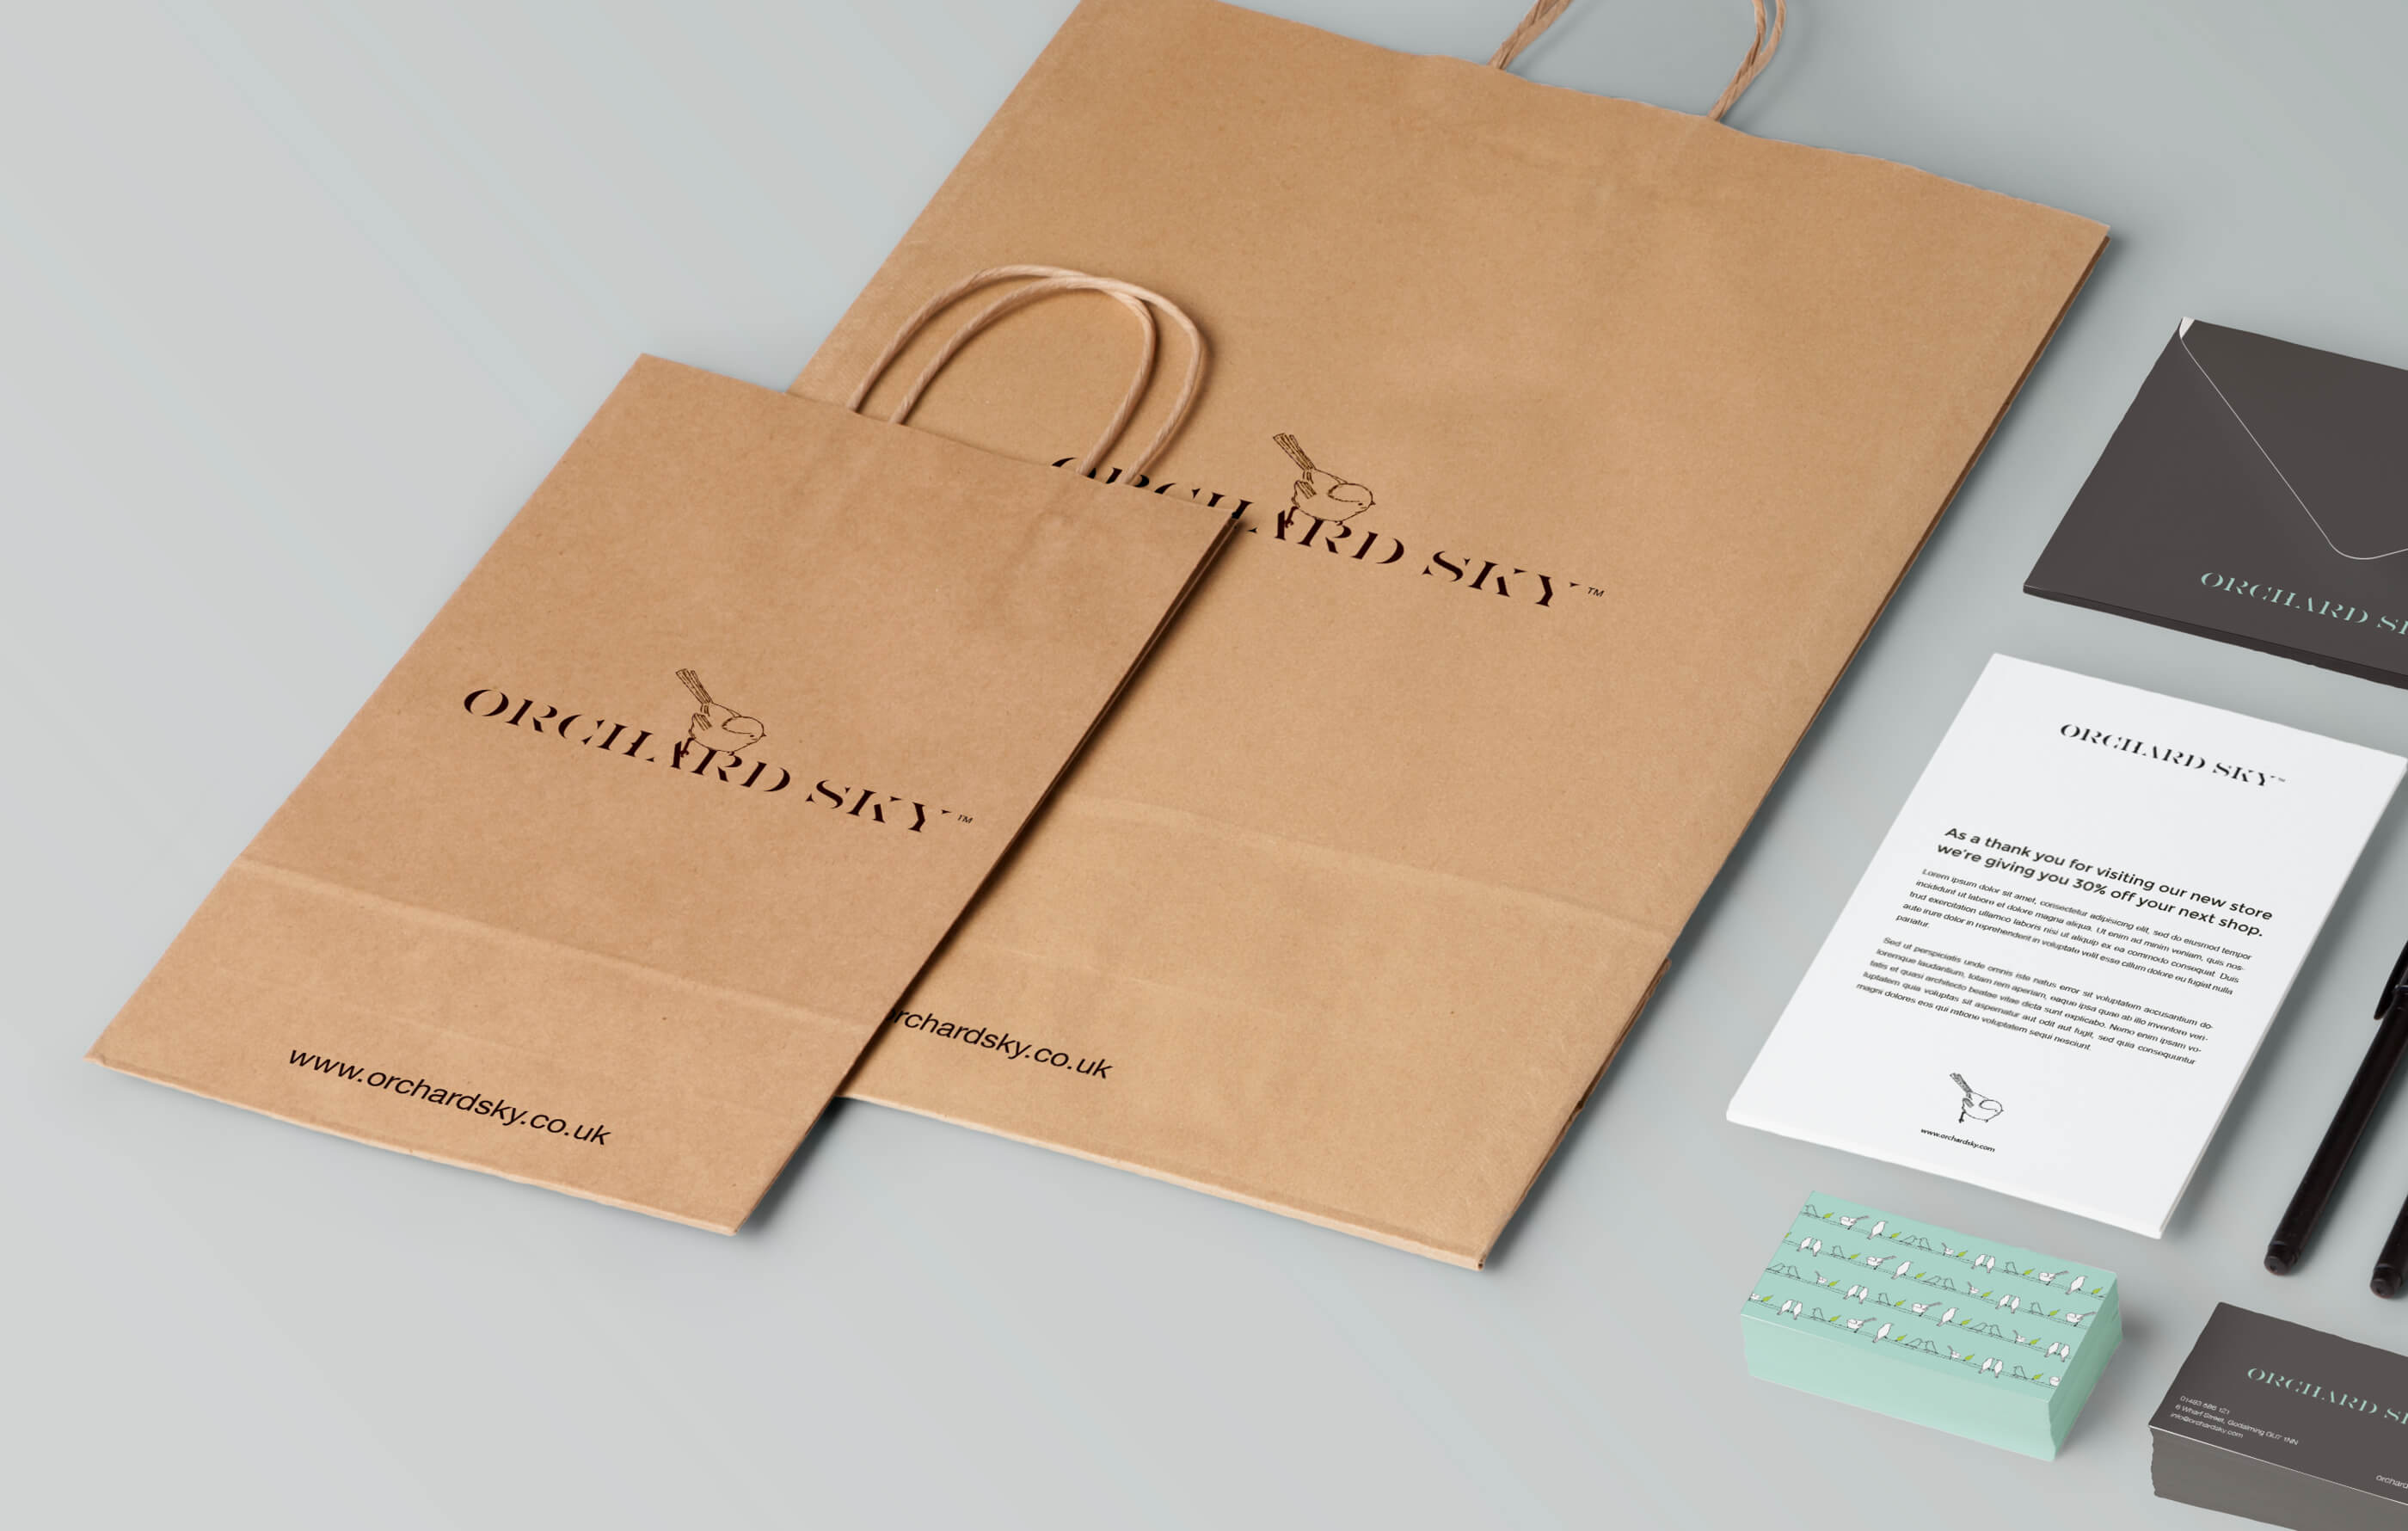 Photorealistic mock up of Orchard Sky stationery and branded collateral, including brown paper bag, business card, pen and an envelope